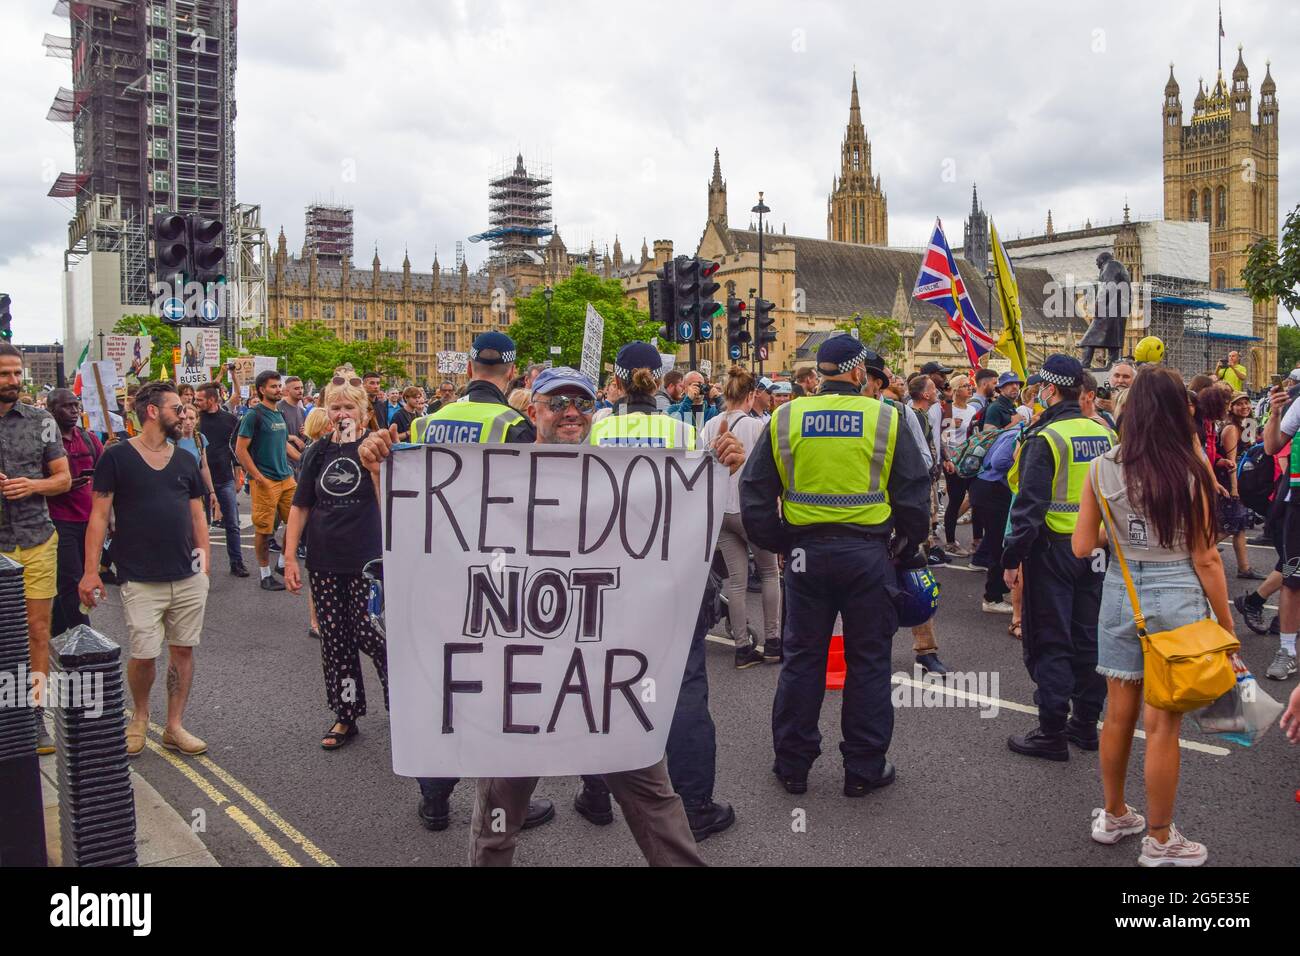 London, United Kingdom. 26th June 2021. Demonstrators march through Parliament Square. Anti-lockdown and anti-vaccination demonstrators gathered in Central London again, in protest against further lockdowns, masks and vaccination passports. (Credit: Vuk Valcic / Alamy Live News) Stock Photo